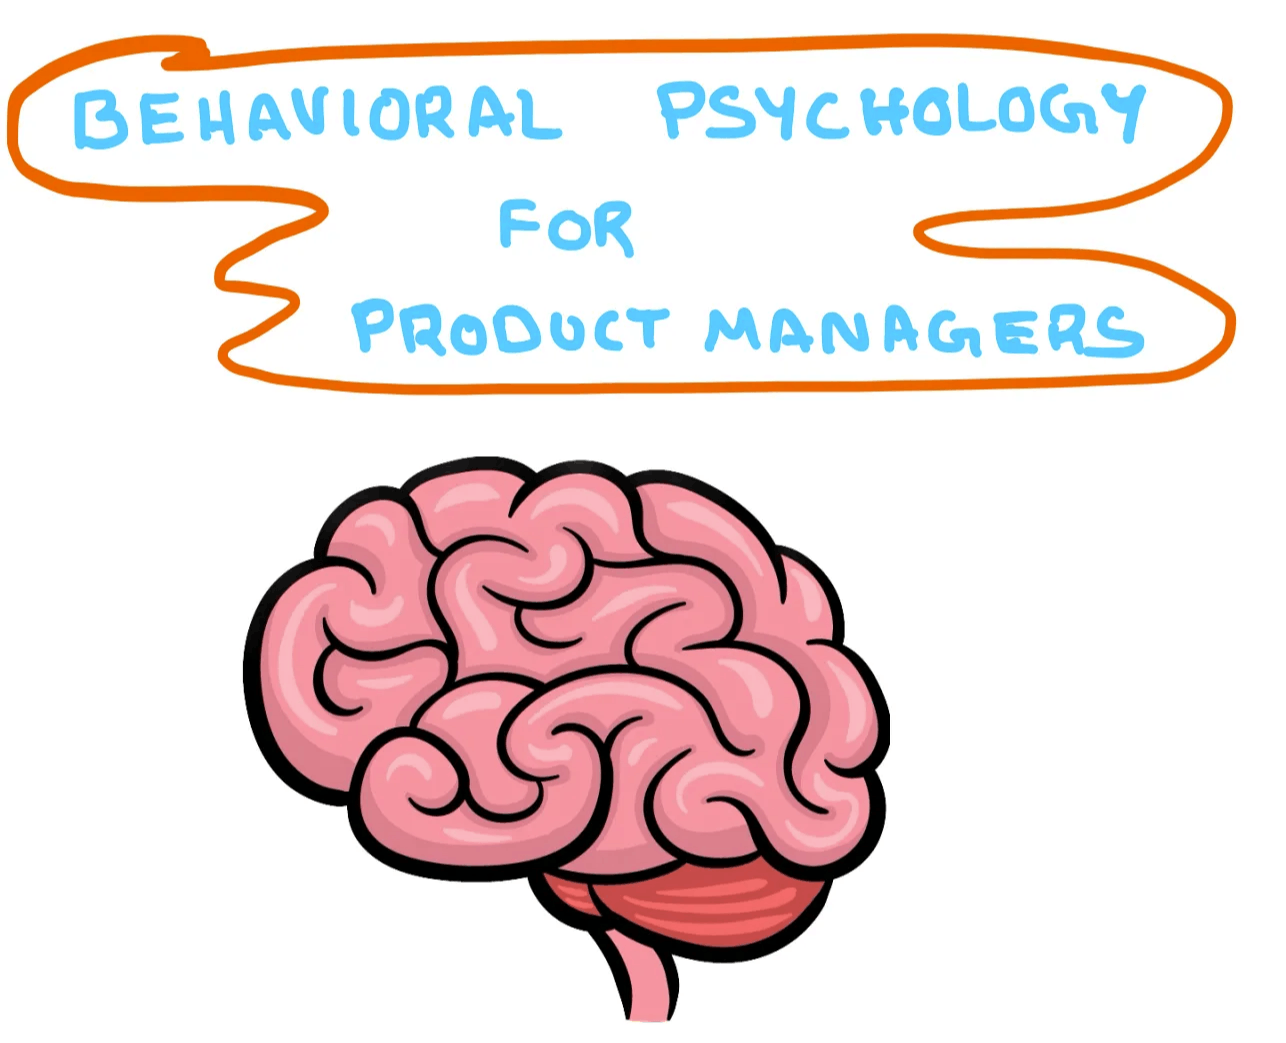 /14-crucial-behavioral-psychology-concepts-for-product-managers feature image